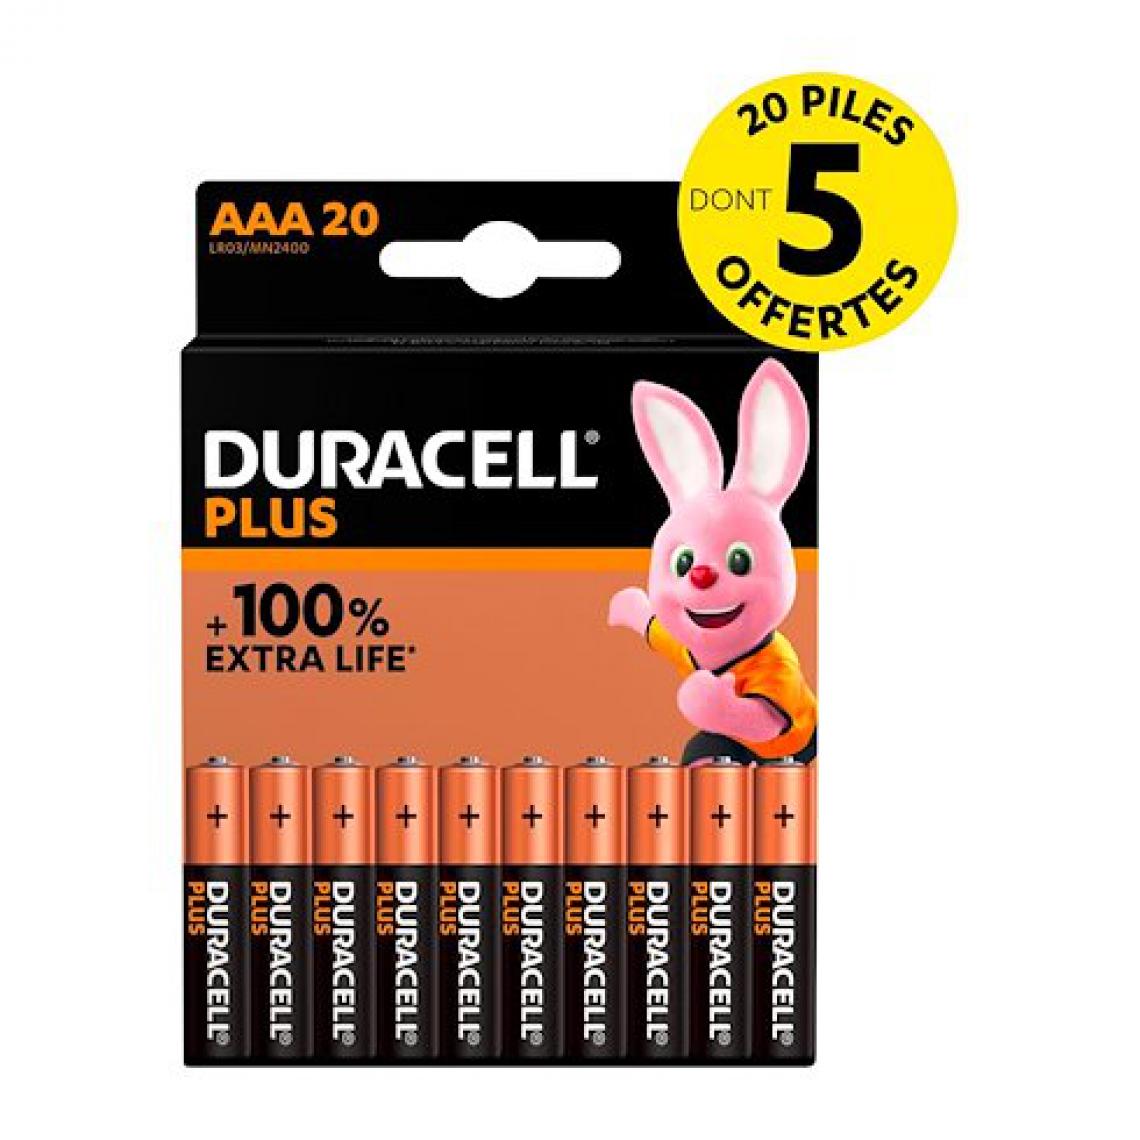 Duracell - Pile AAA- LR03 Duracell Plus 1,5V - Piles rechargeables